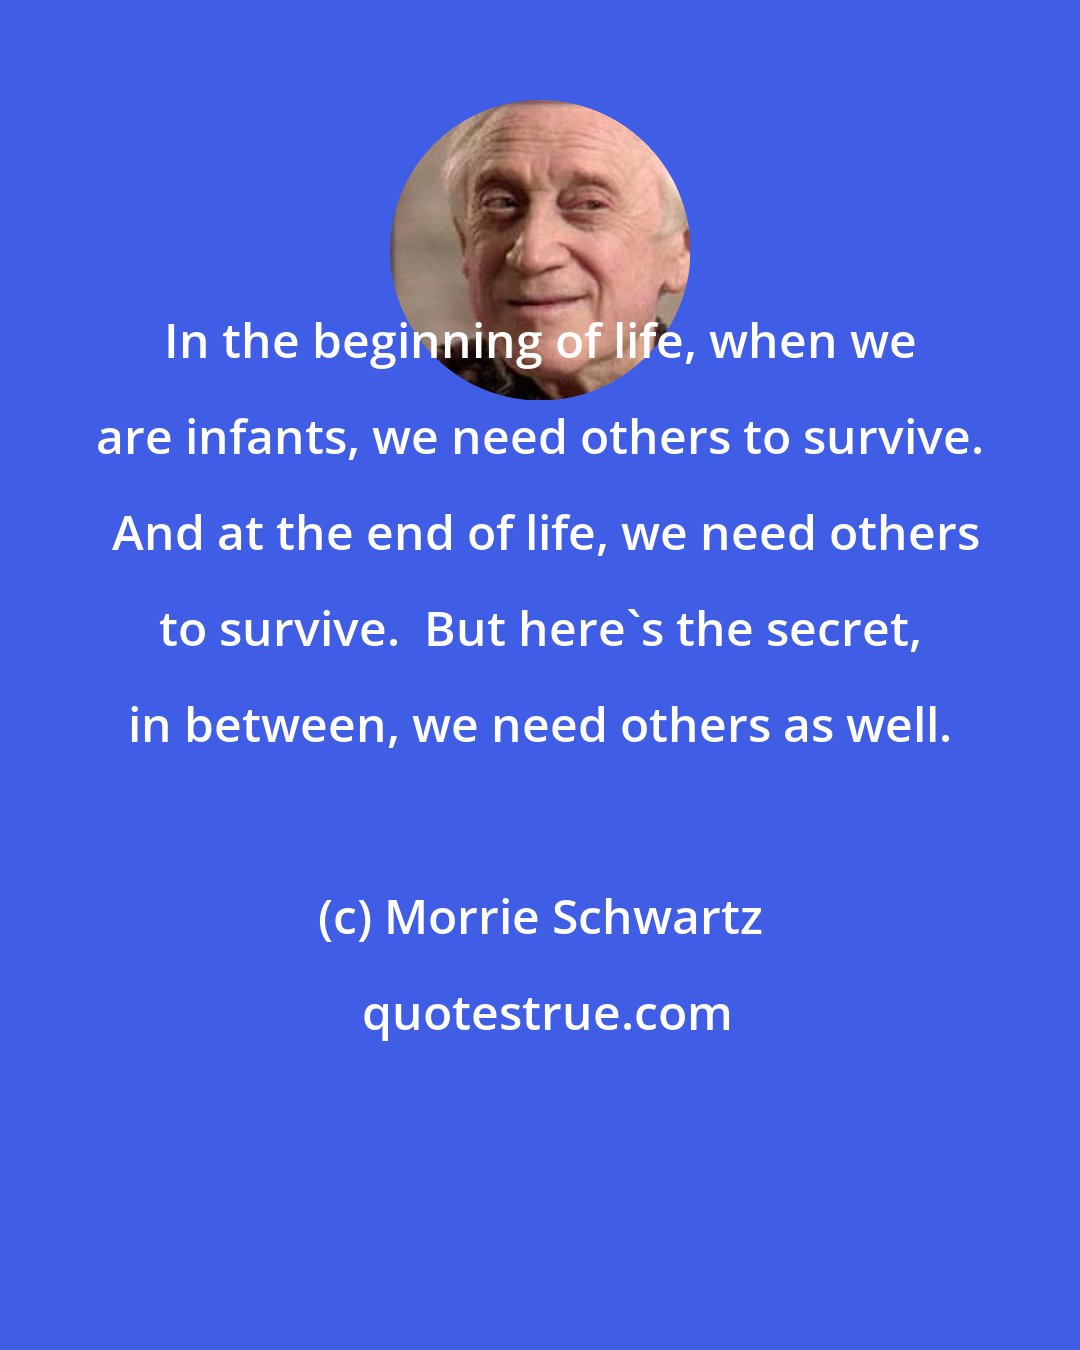 Morrie Schwartz: In the beginning of life, when we are infants, we need others to survive.  And at the end of life, we need others to survive.  But here's the secret, in between, we need others as well.